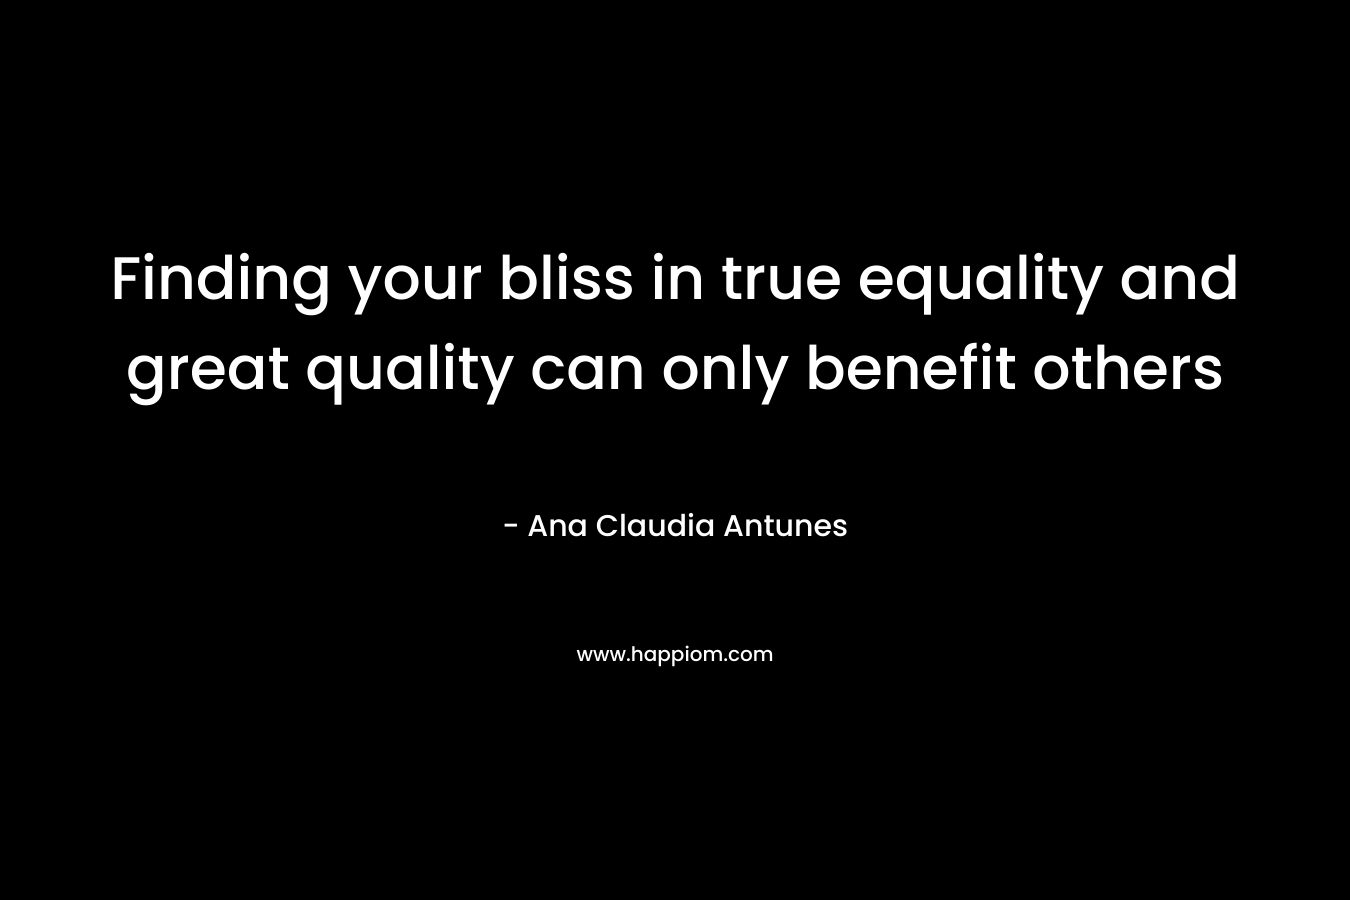 Finding your bliss in true equality and great quality can only benefit others